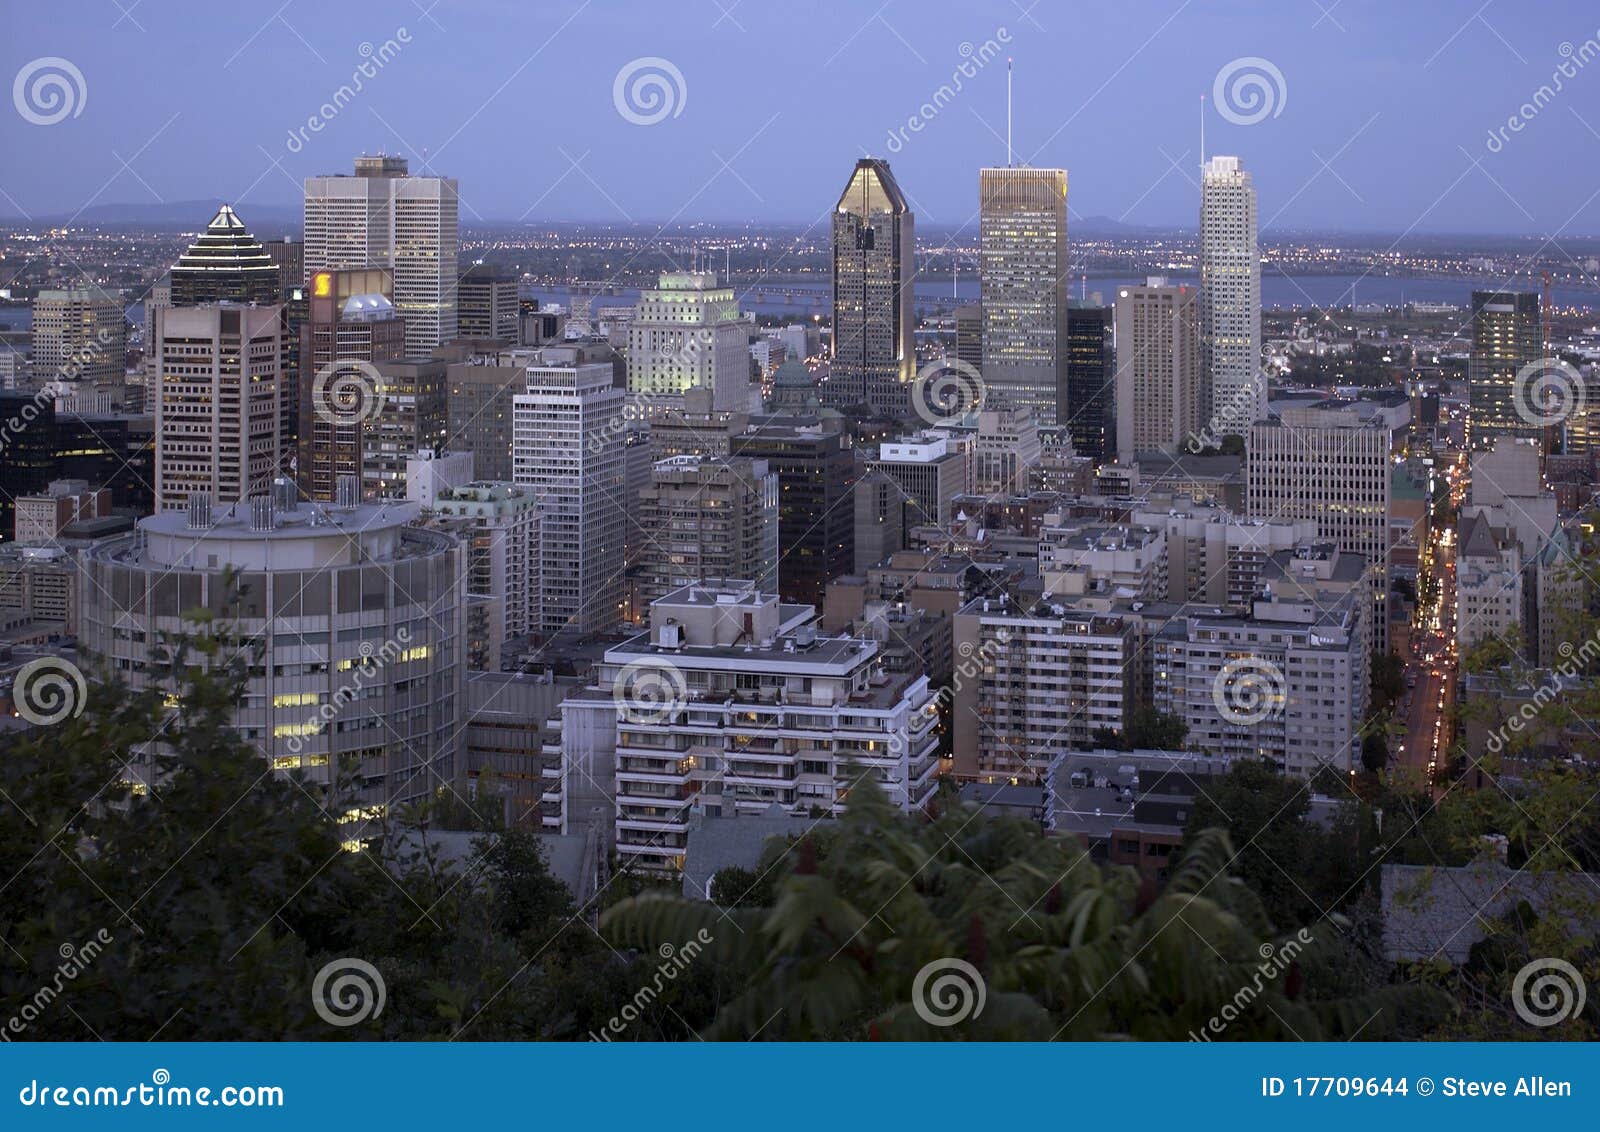 montreal - canada